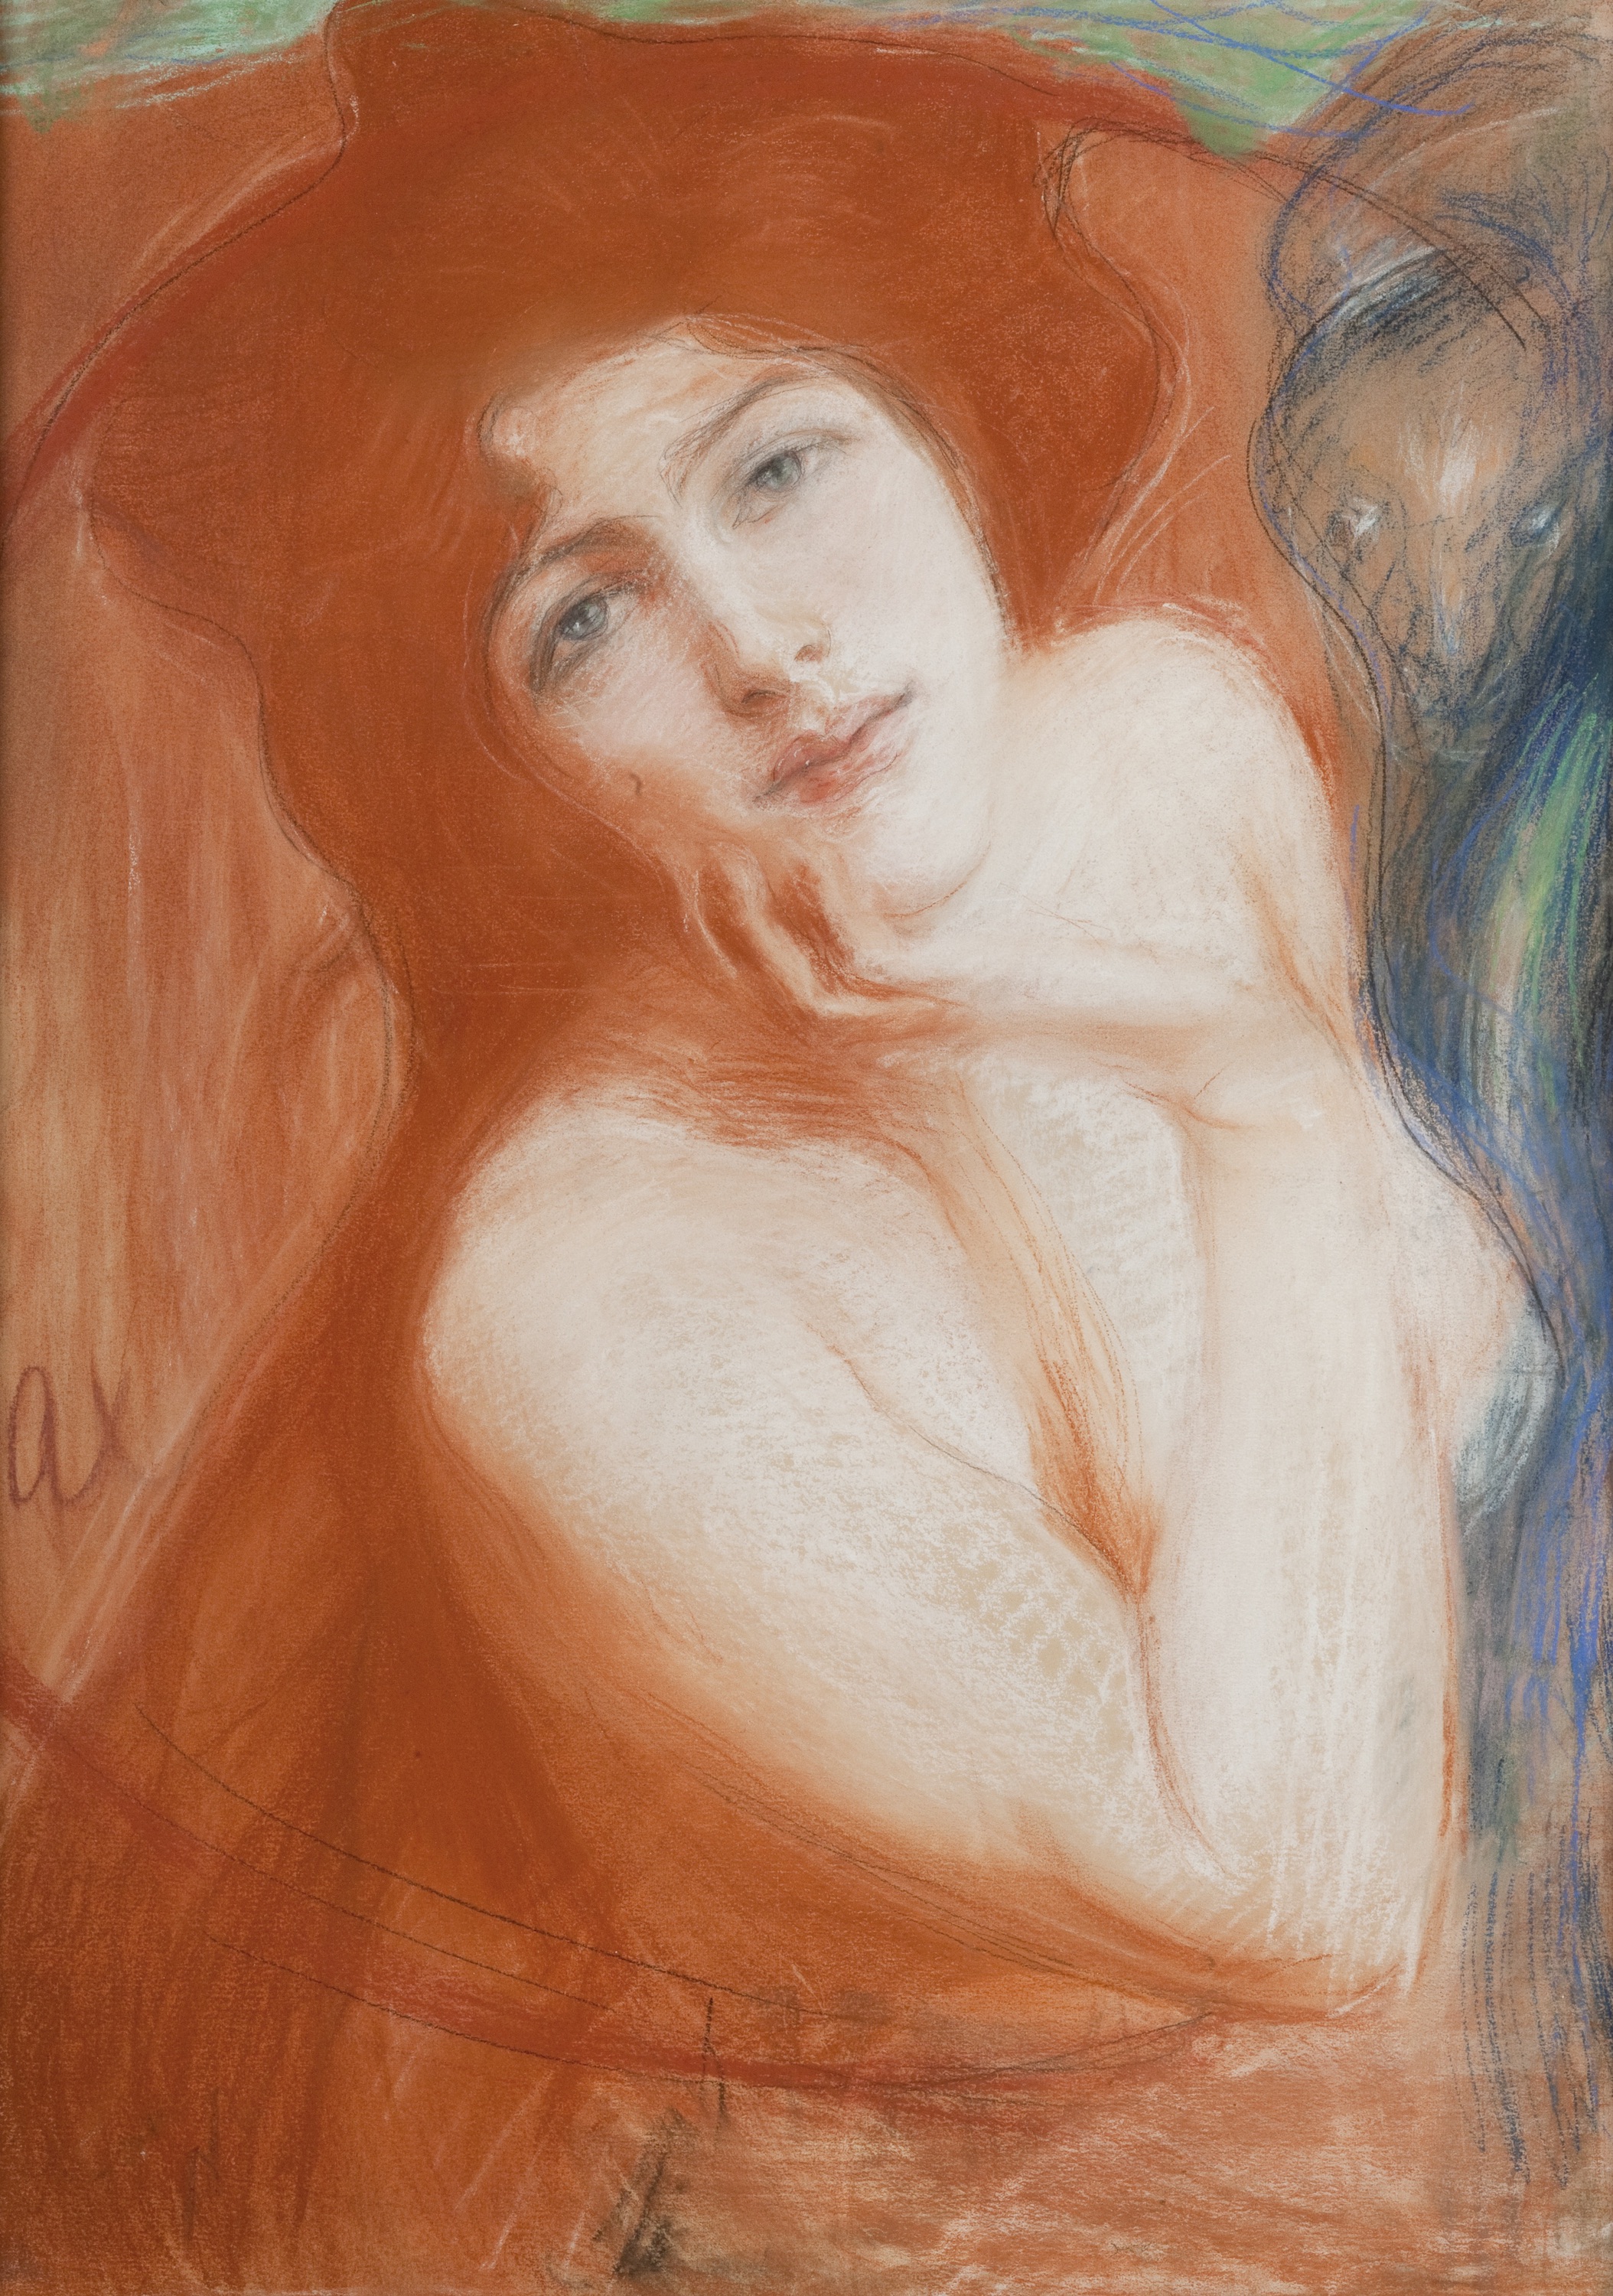 Redhead by Teodor Axentowicz - 1899 National Museum in Krakow